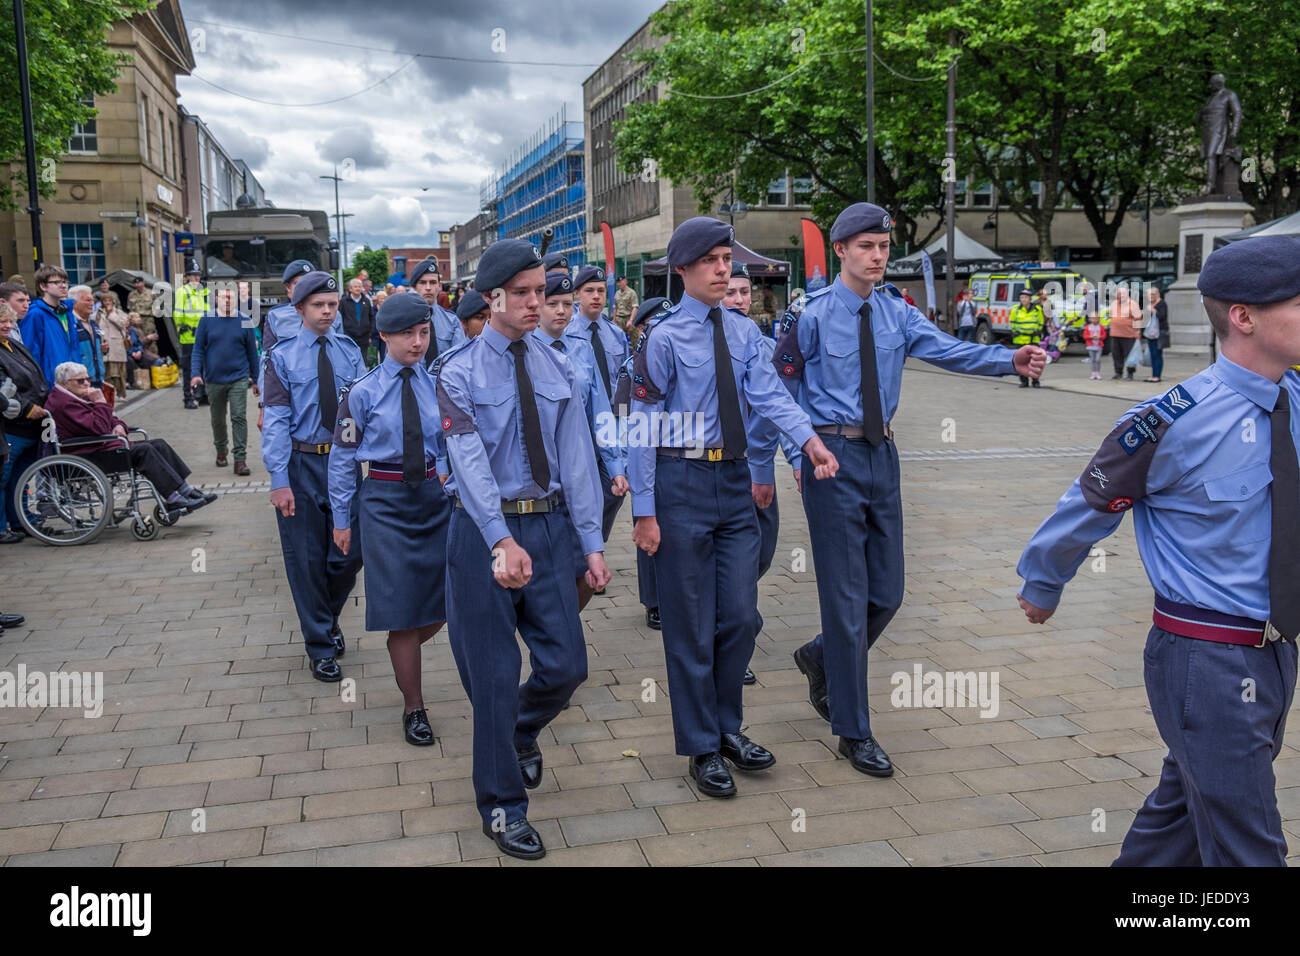 Bolton, Greater Manchester, England, UK 24th June 2017. Armed Forces Day celebrated in Bolton Town Centre with three of the forces present, Army Navy and Airforce,  The navy raised the standard just before 11:00 hours.  The groups all martched into position awaiting the arrival of the Vicar of Bolton, Bolton Mayor and other dignitaries, they all stood on the town hall steps where the vicar of Bolton conducted a small service in commemoration of the lives lost in various conflicts around the world. Credit: Mike Hesp/Alamy Live News Stock Photo